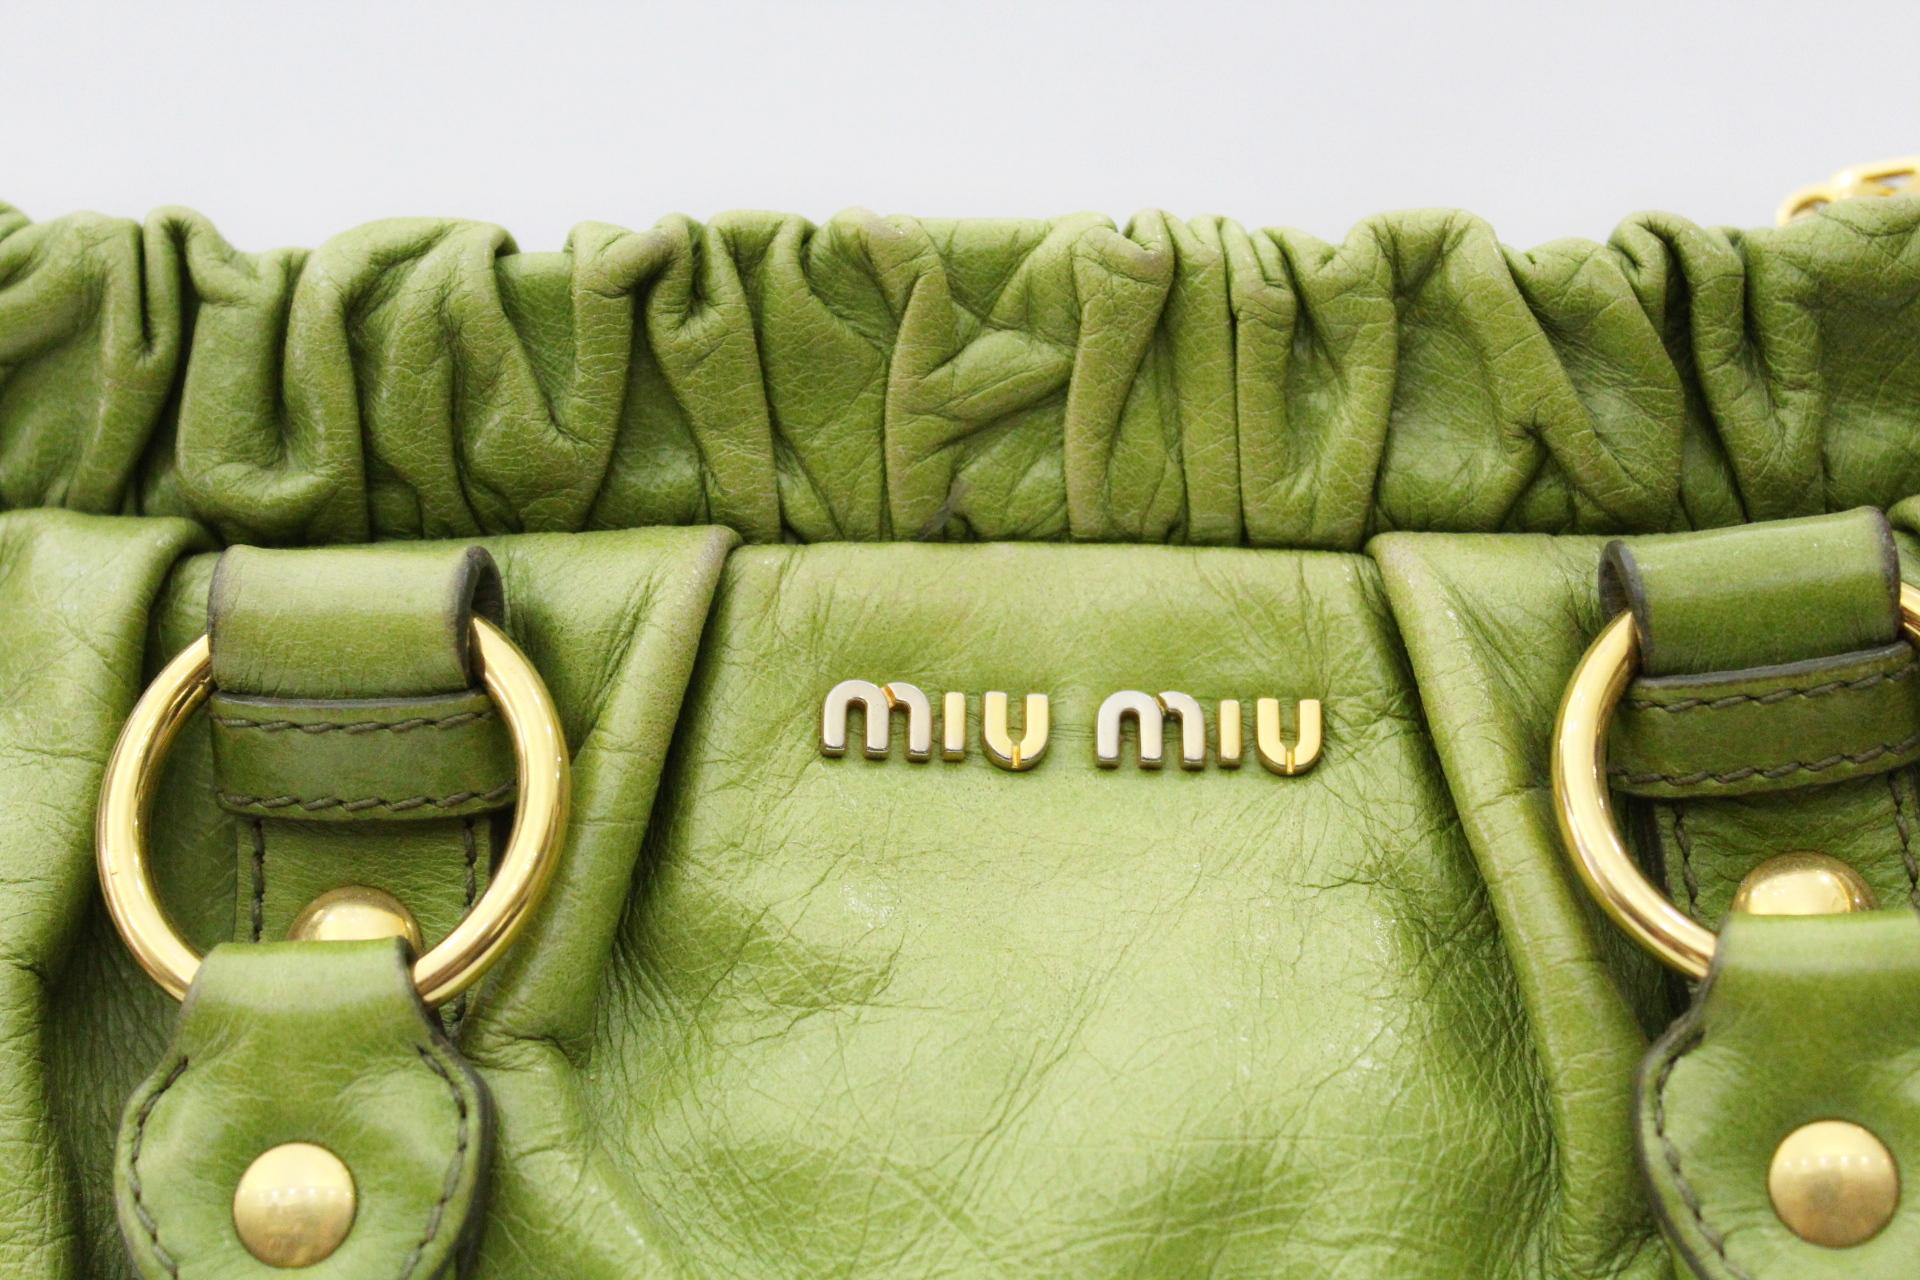 
Grasped Miu Miu bag. Apple green leather. Adjustable and removable shoulder strap.
Wearable also by hand thanks to the two leather handles.
Gold inserts. Equipped with an inside zip pocket.
Good condition, presents only some internal stain.